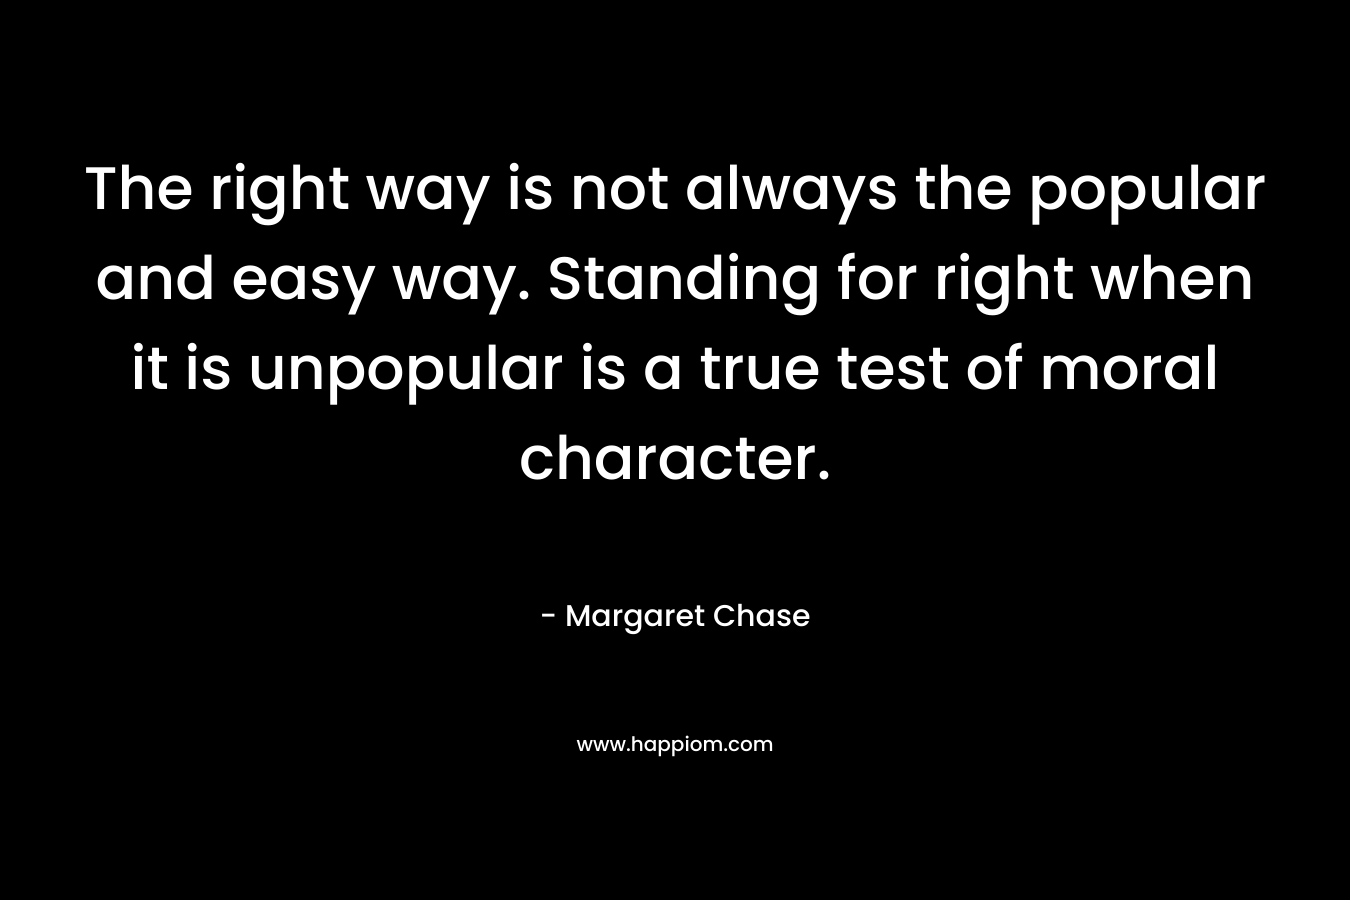 The right way is not always the popular and easy way. Standing for right when it is unpopular is a true test of moral character.